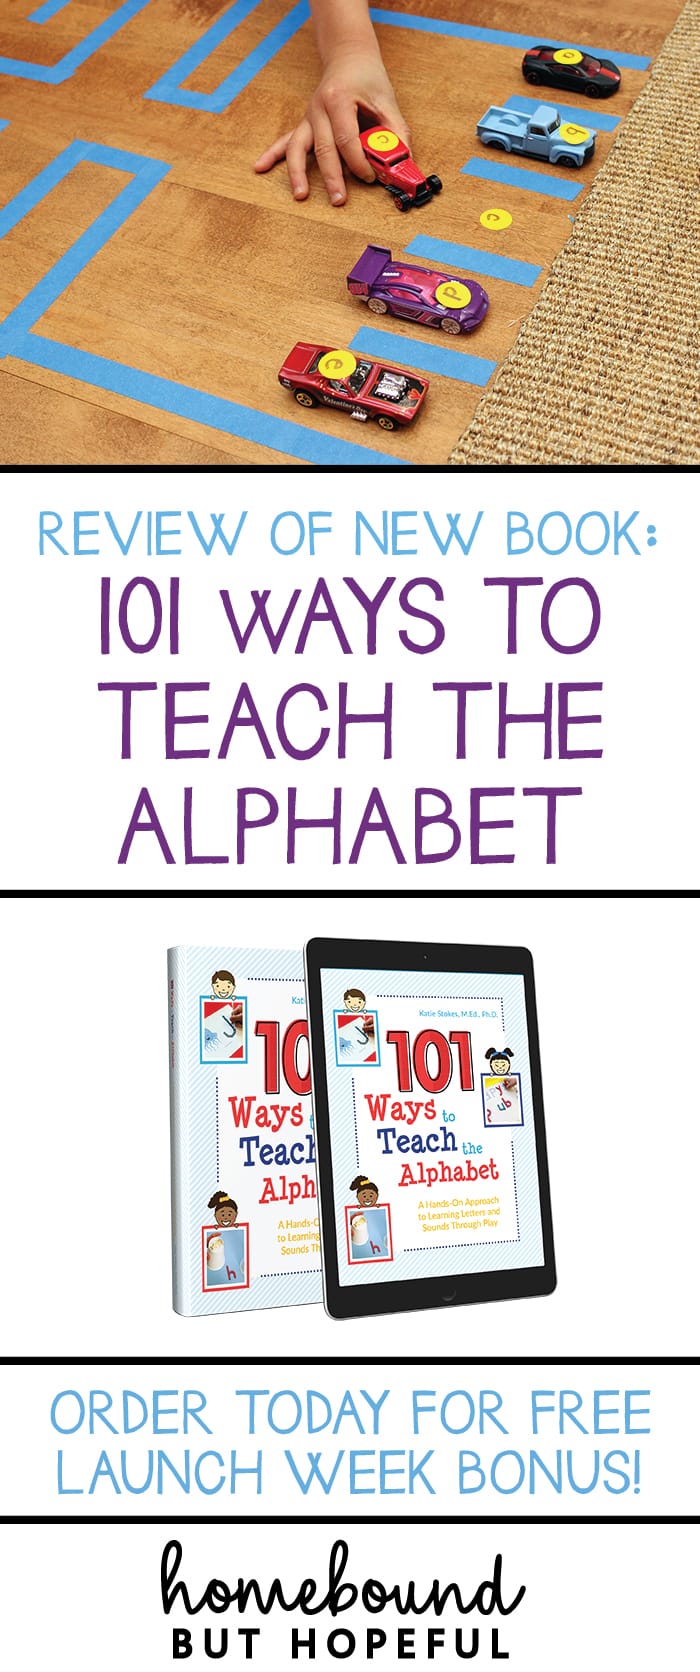 We got an early look at the incredible resource 101 Ways To Teach The Alphabet. This book and printables package is packed full of ideas to help your little ones master their A-B-Cs while having fun! Order during launch week to take advantage of savings and free bonus offers! Early Learning | Early Literacy | Homeschool